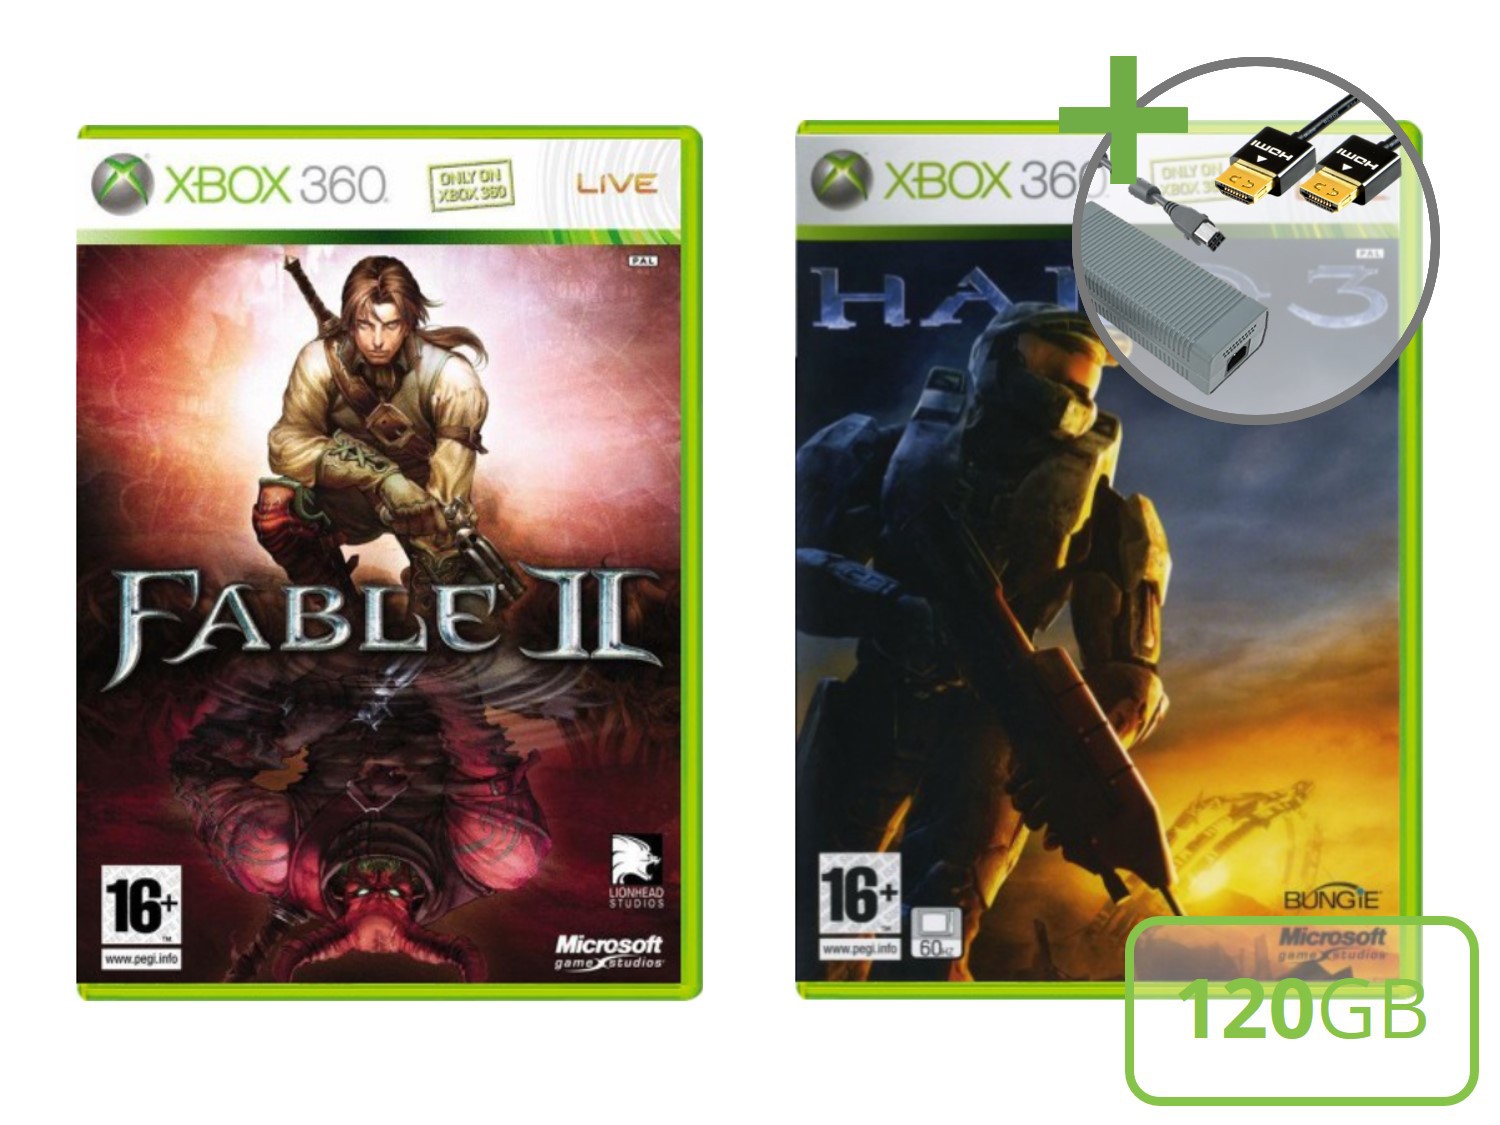 Microsoft Xbox 360 Elite Starter Pack - Fable II and Halo 3 Edition - Xbox 360 Hardware - 5